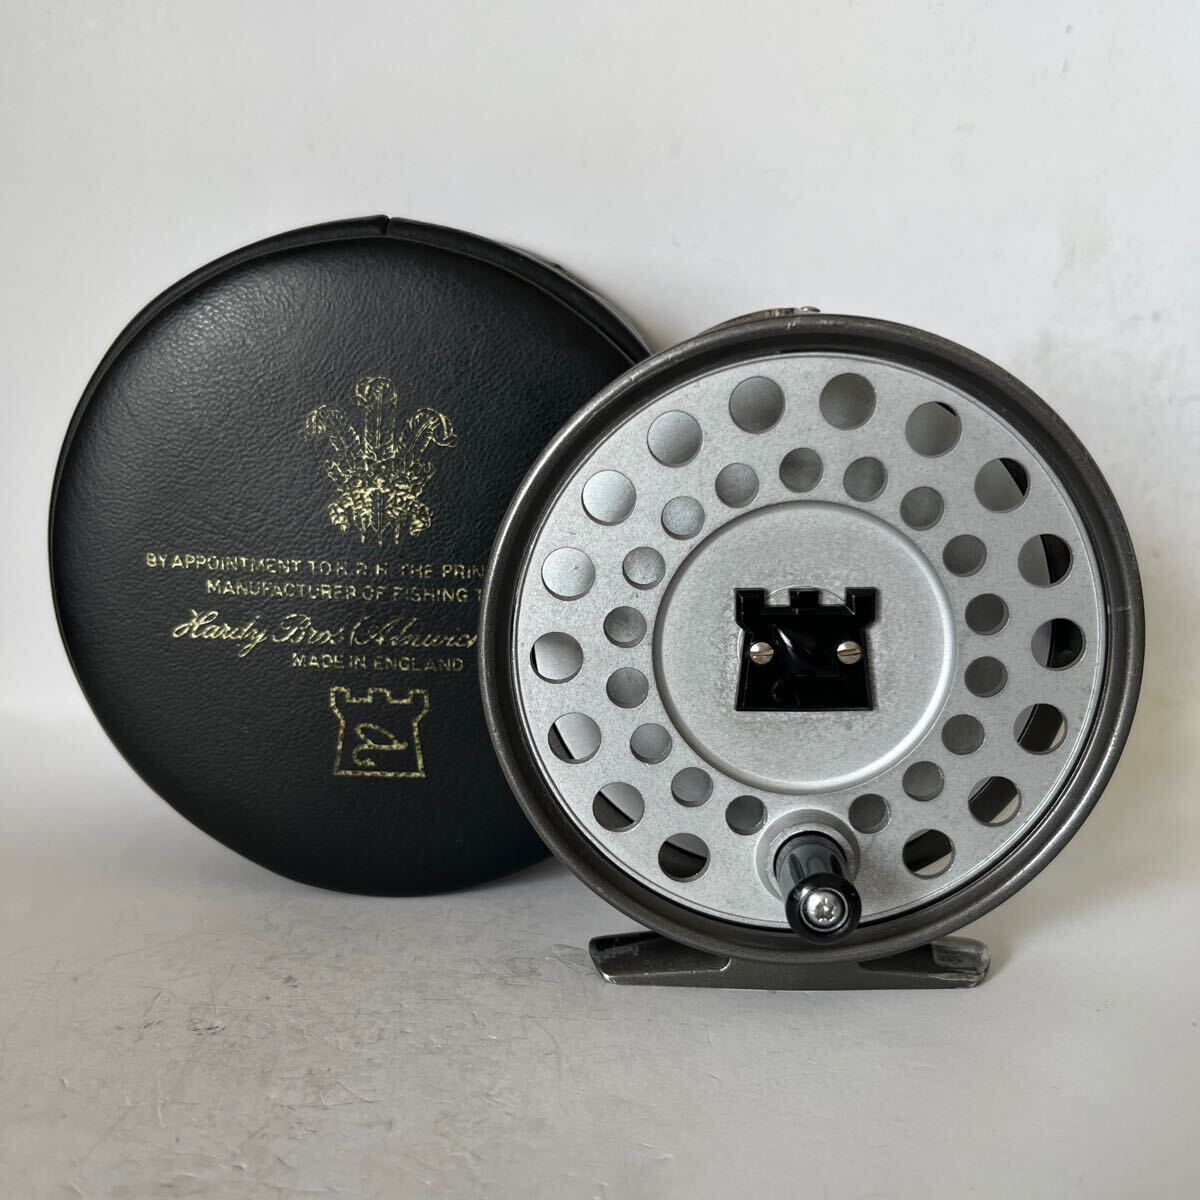 Vintage “The Viscount 140” Fly Fishing Reel Made by Hardy Bros Ltd England 純正ケース付の画像1